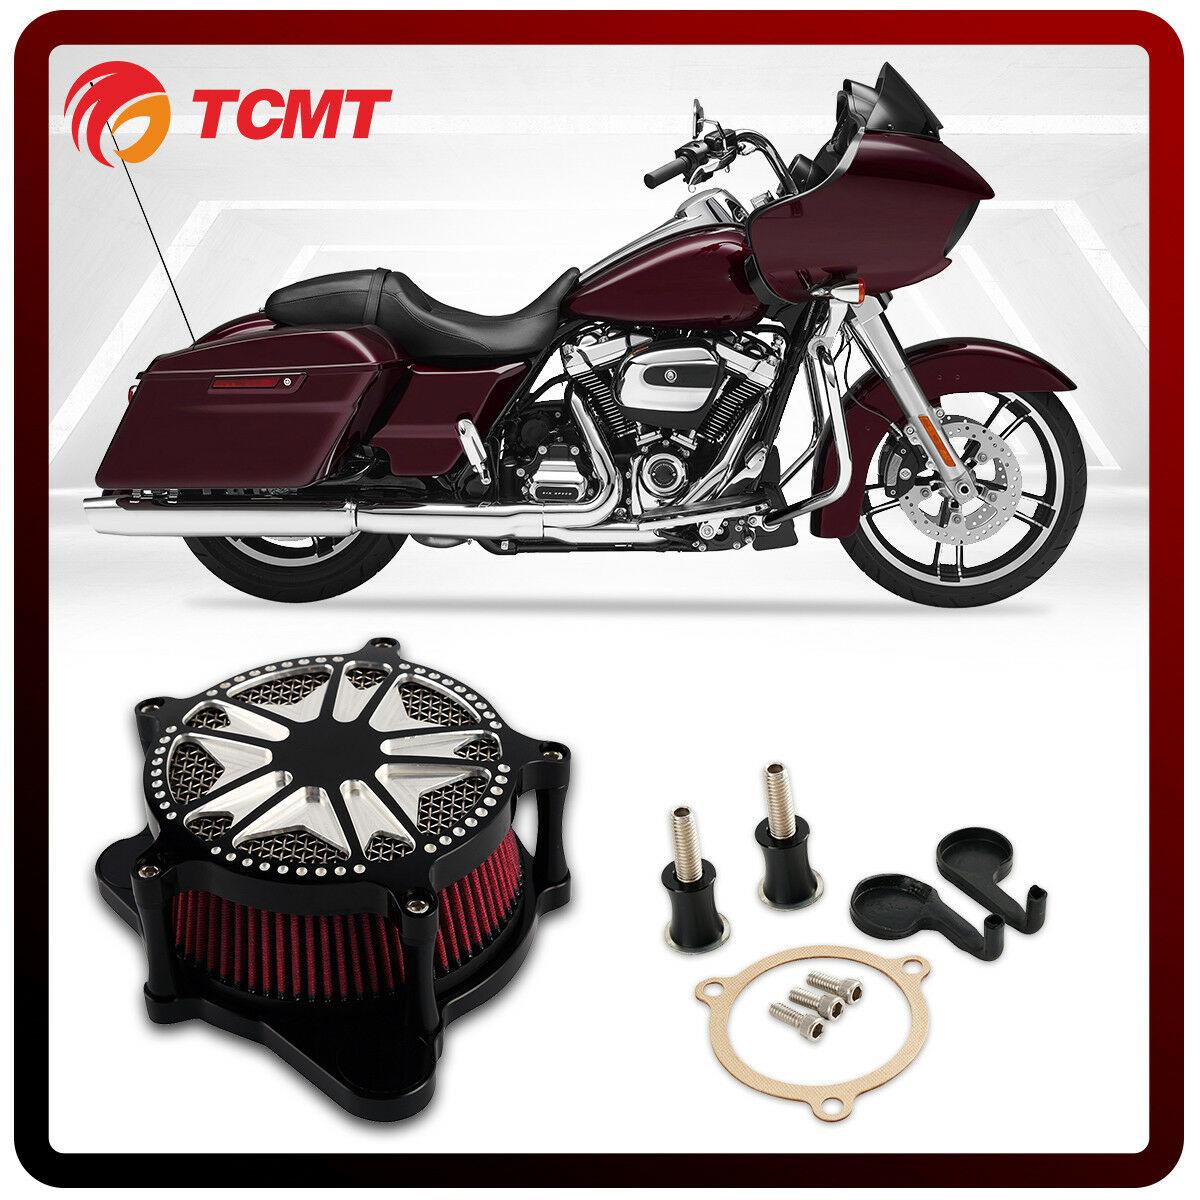 Aluminum Air Cleaner Filter Fit For Harley Road Glide Street Electra Glide 17-19 - Moto Life Products